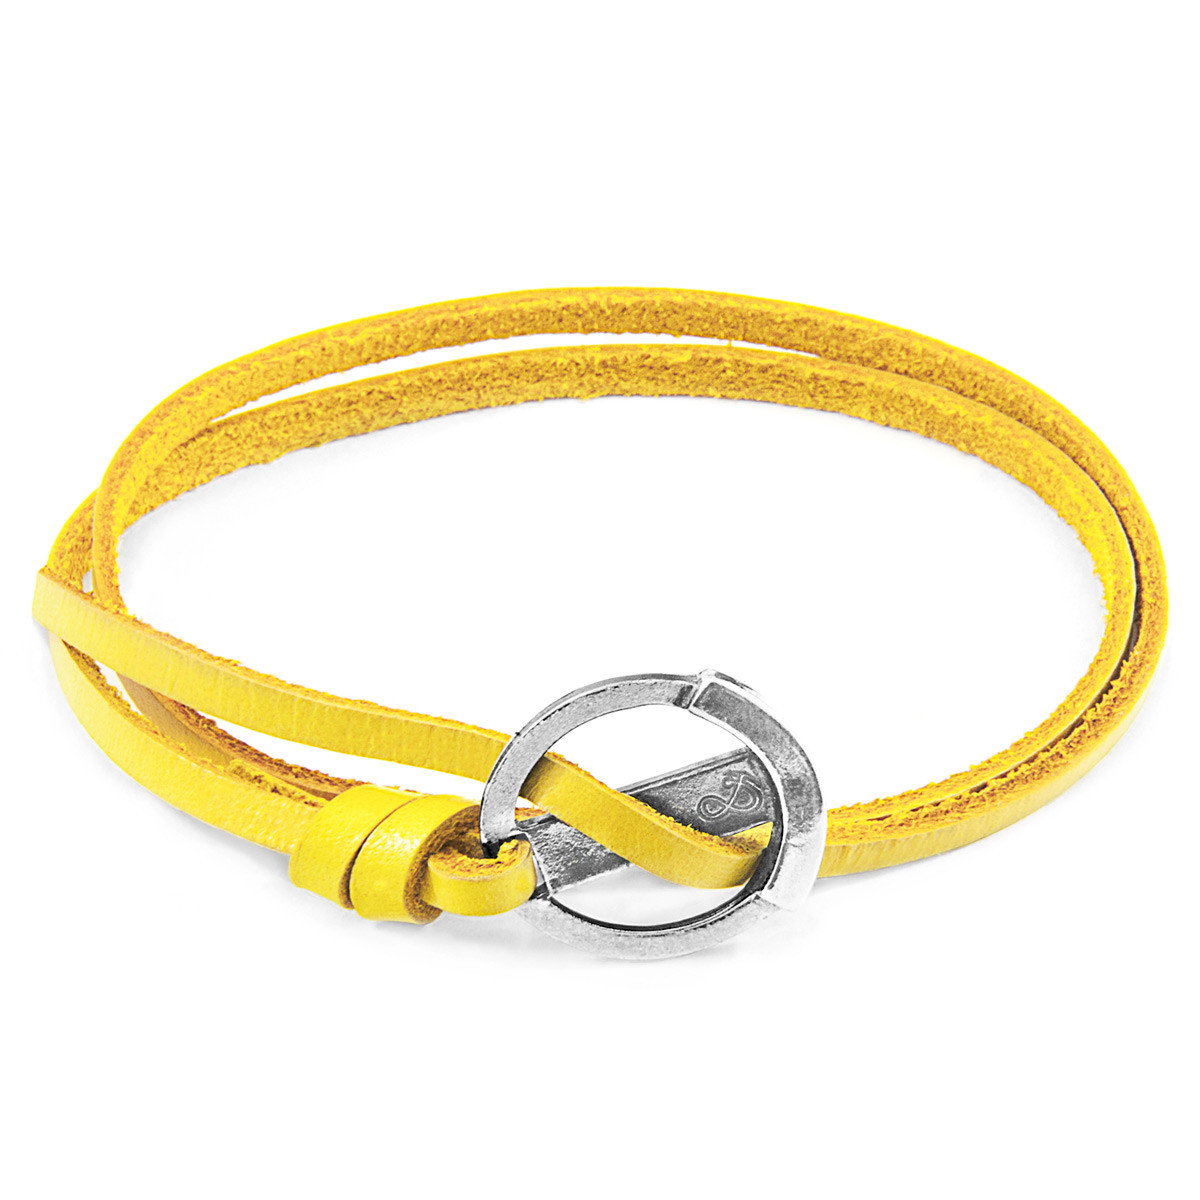 Mustard Yellow Ketch Anchor Silver and Flat Leather Bracelet